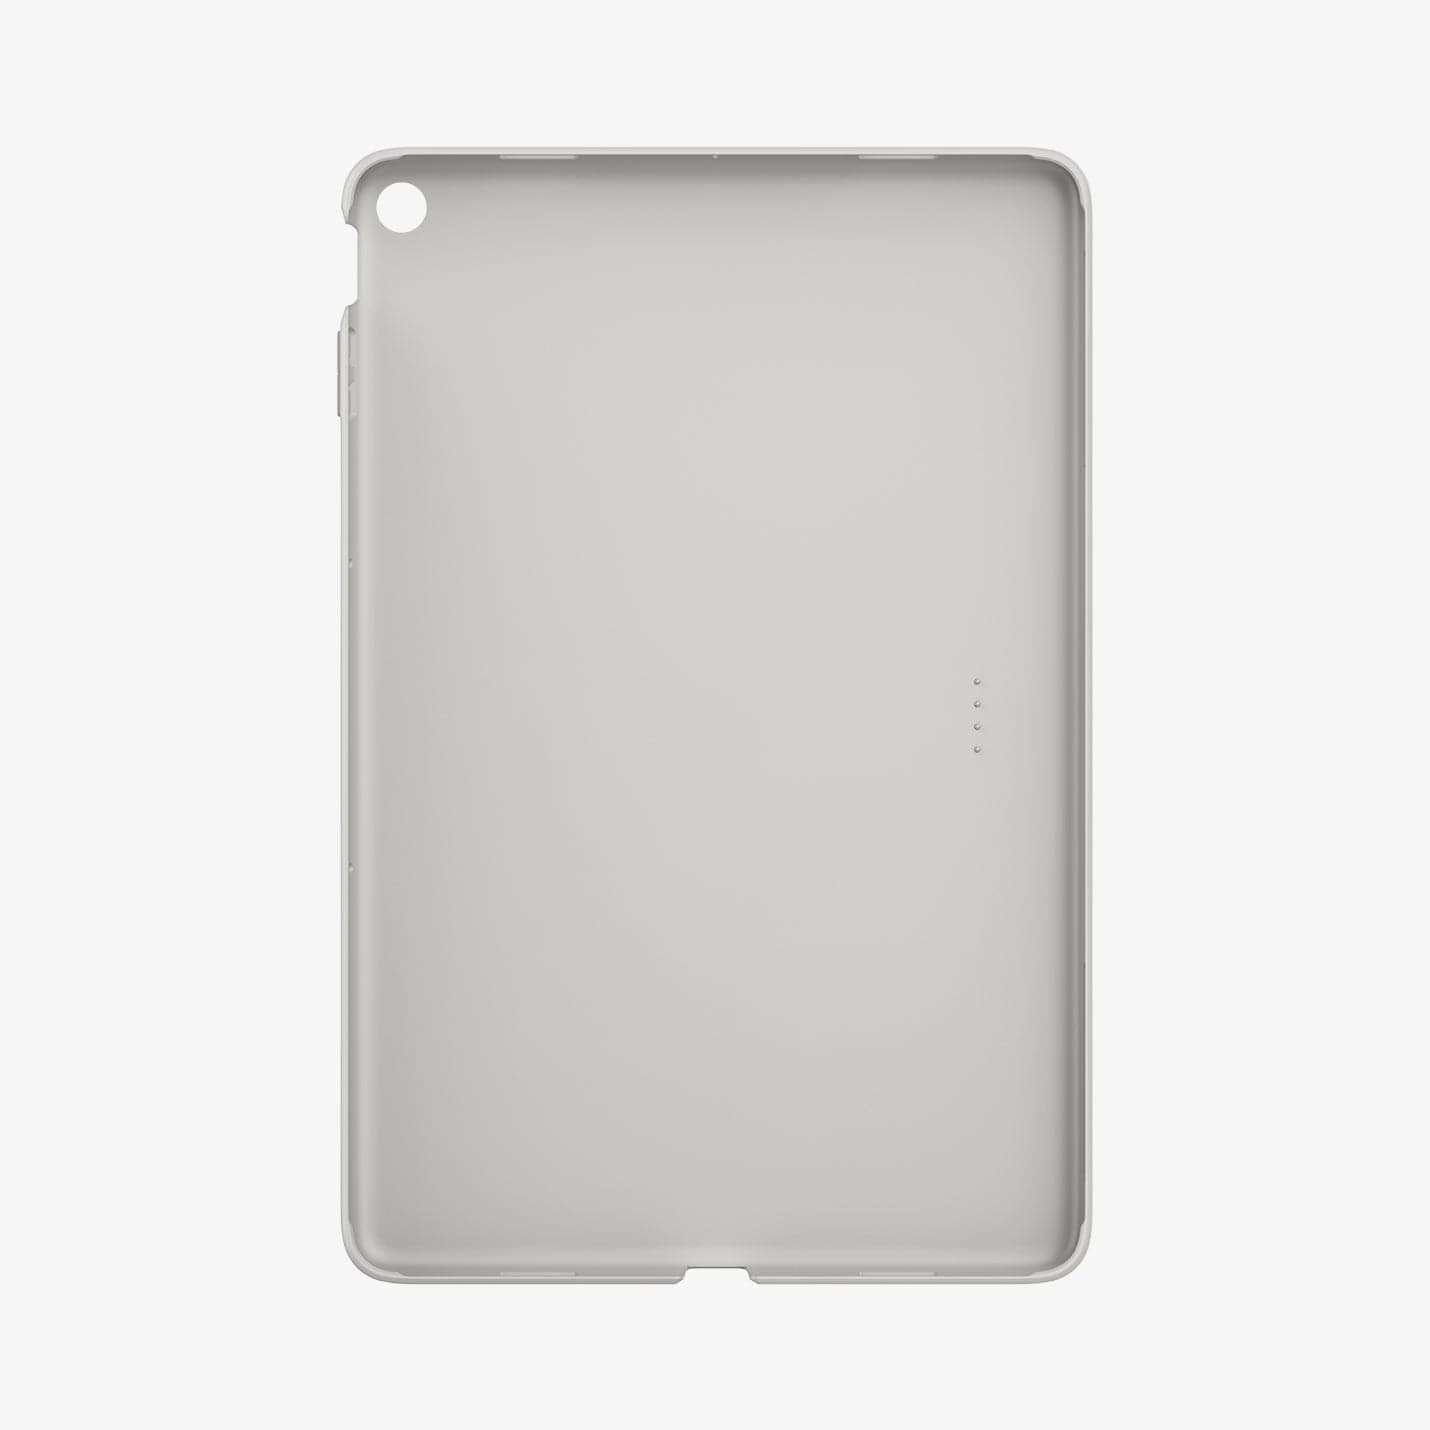 ACS06924 - Pixel Tablet Case Thin Fit Pro in gray showing the inside of case